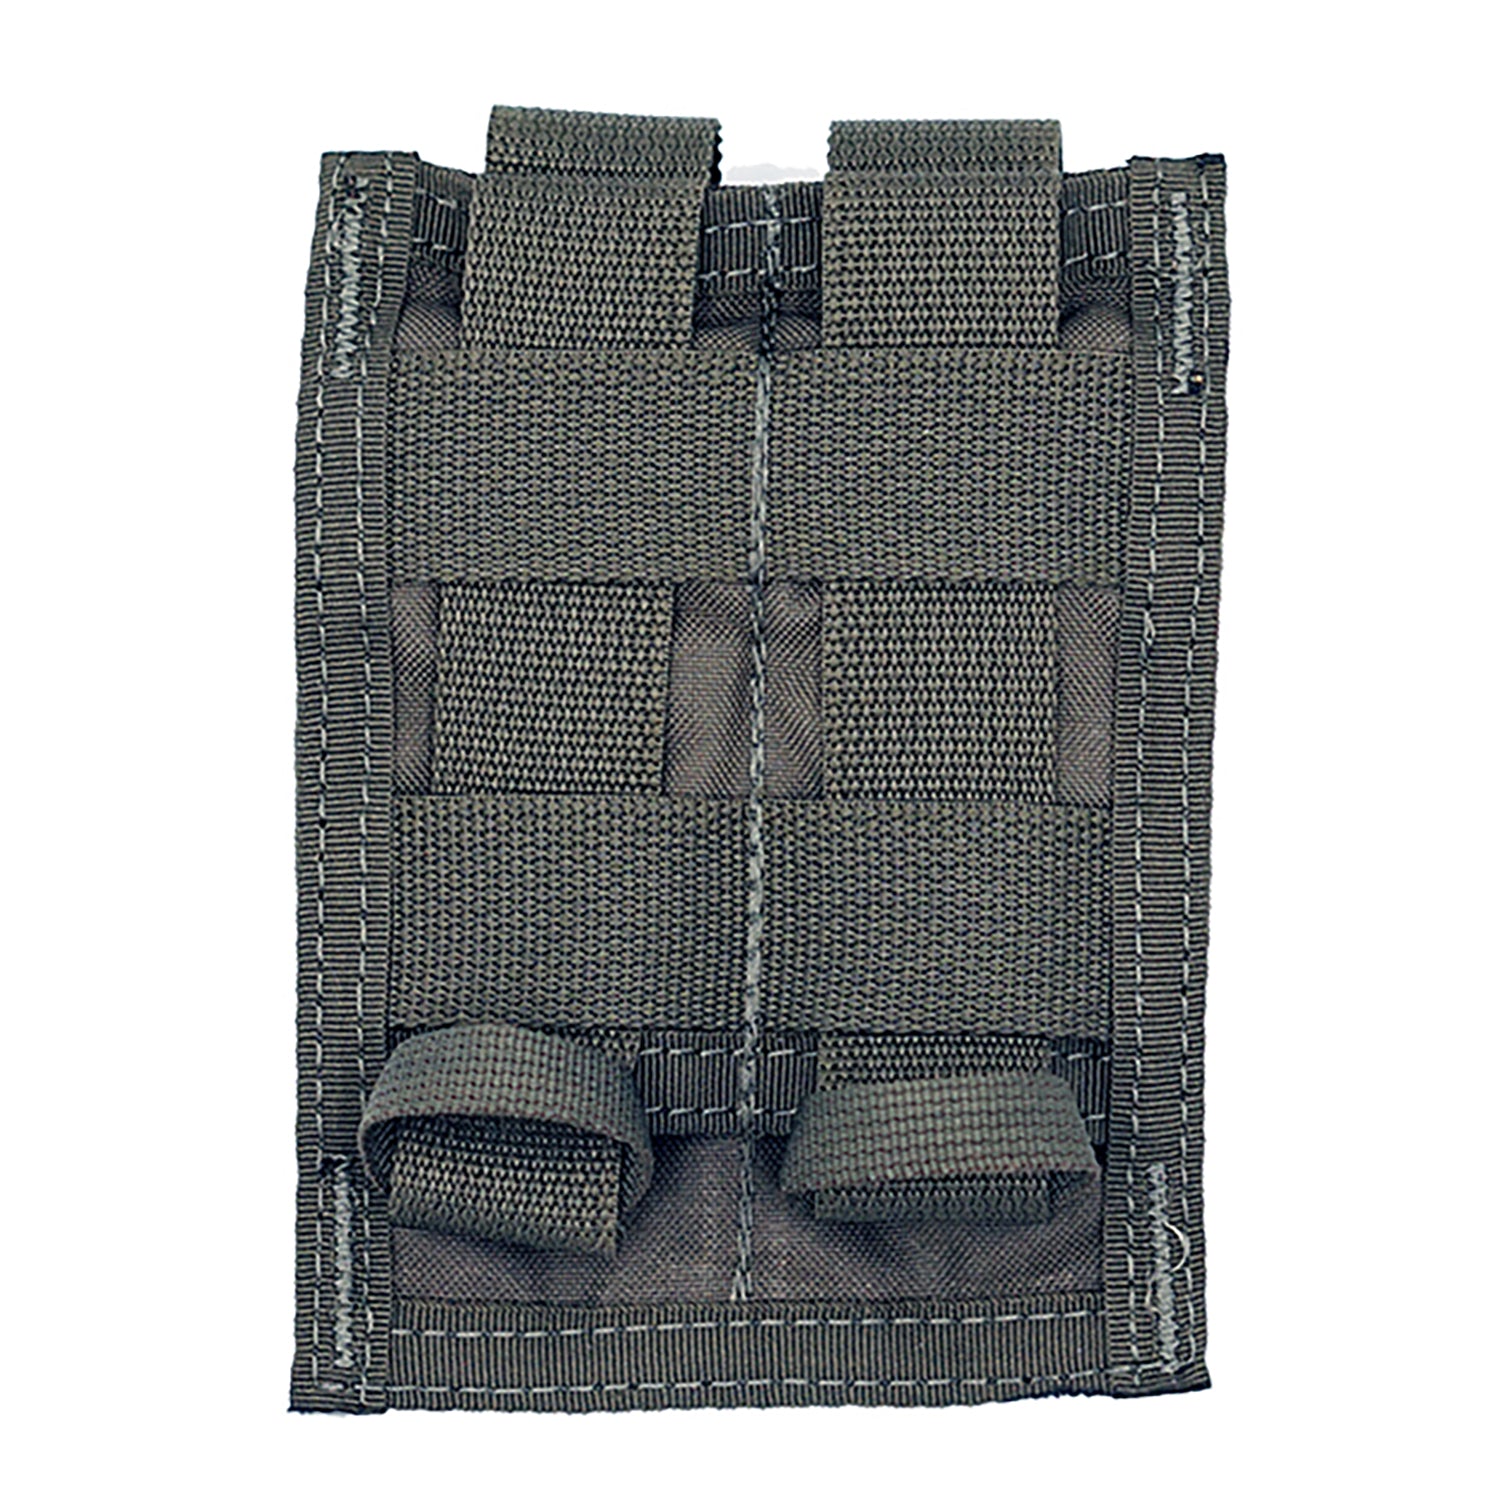 Pre MSA Paraclete style Double Pistol Mag Pouches - Shekkin Gears